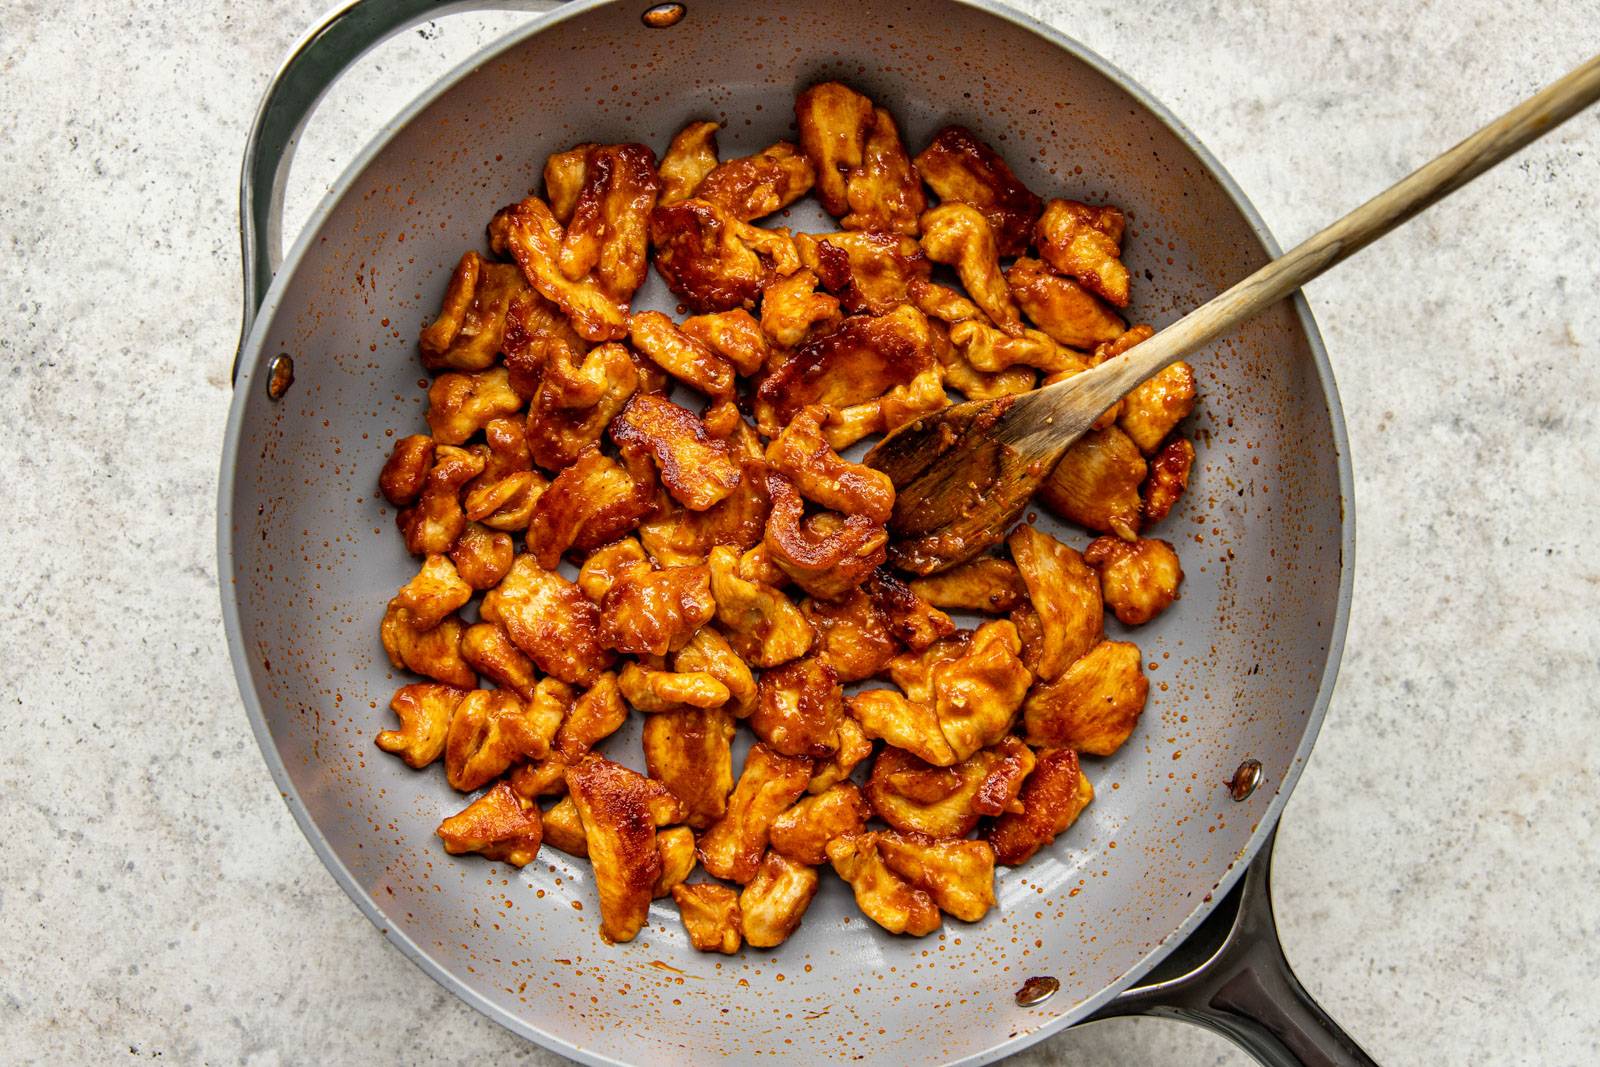 Caramelized chicken pieces in a pan